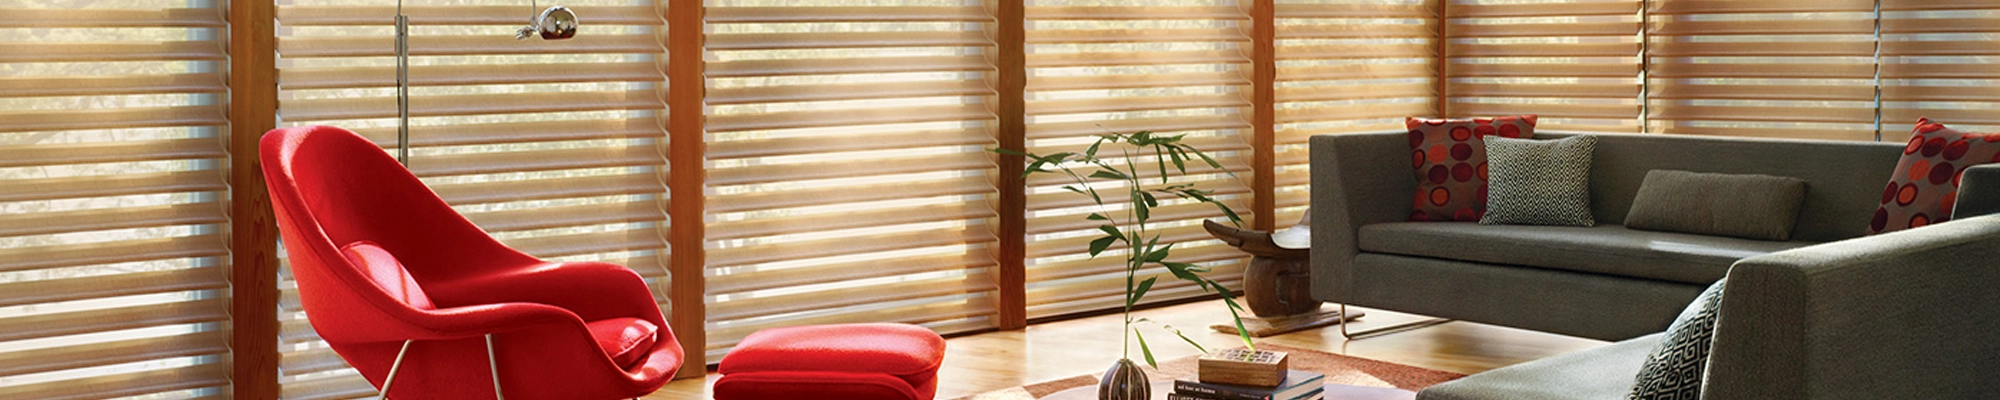 Window treatments provided by CM Floor Covering Inc